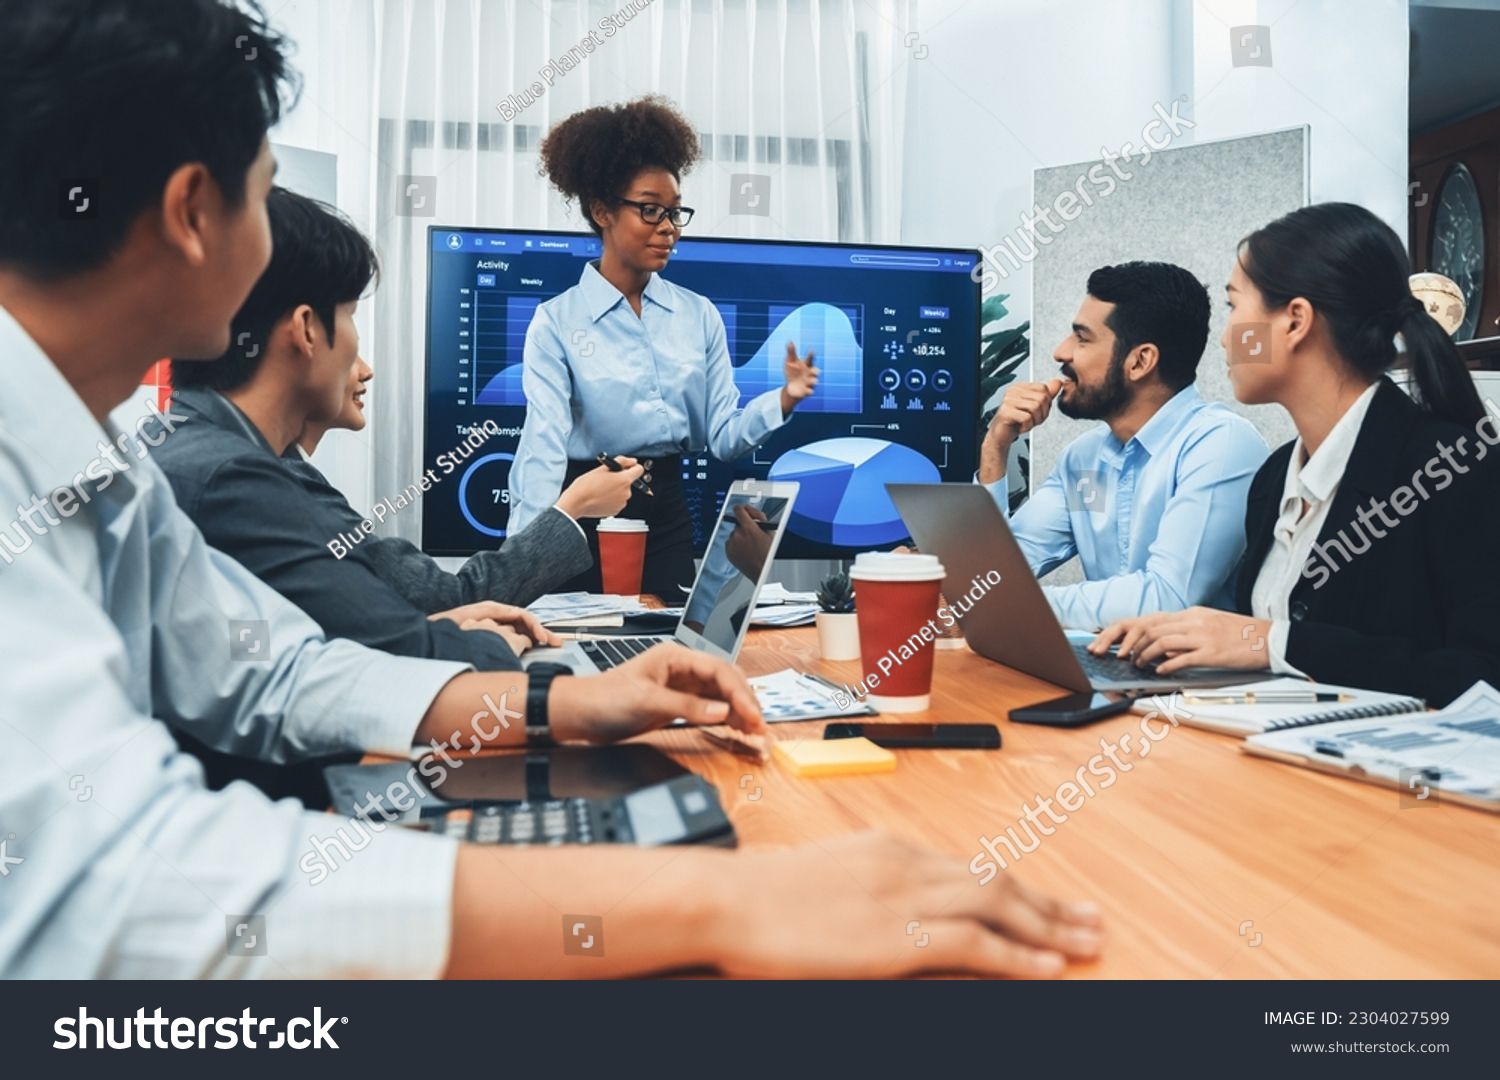 Young african businesswoman presenting data analysis dashboard on TV screen in modern meeting. Business presentation with group of business people in conference room. Concord #2304027599